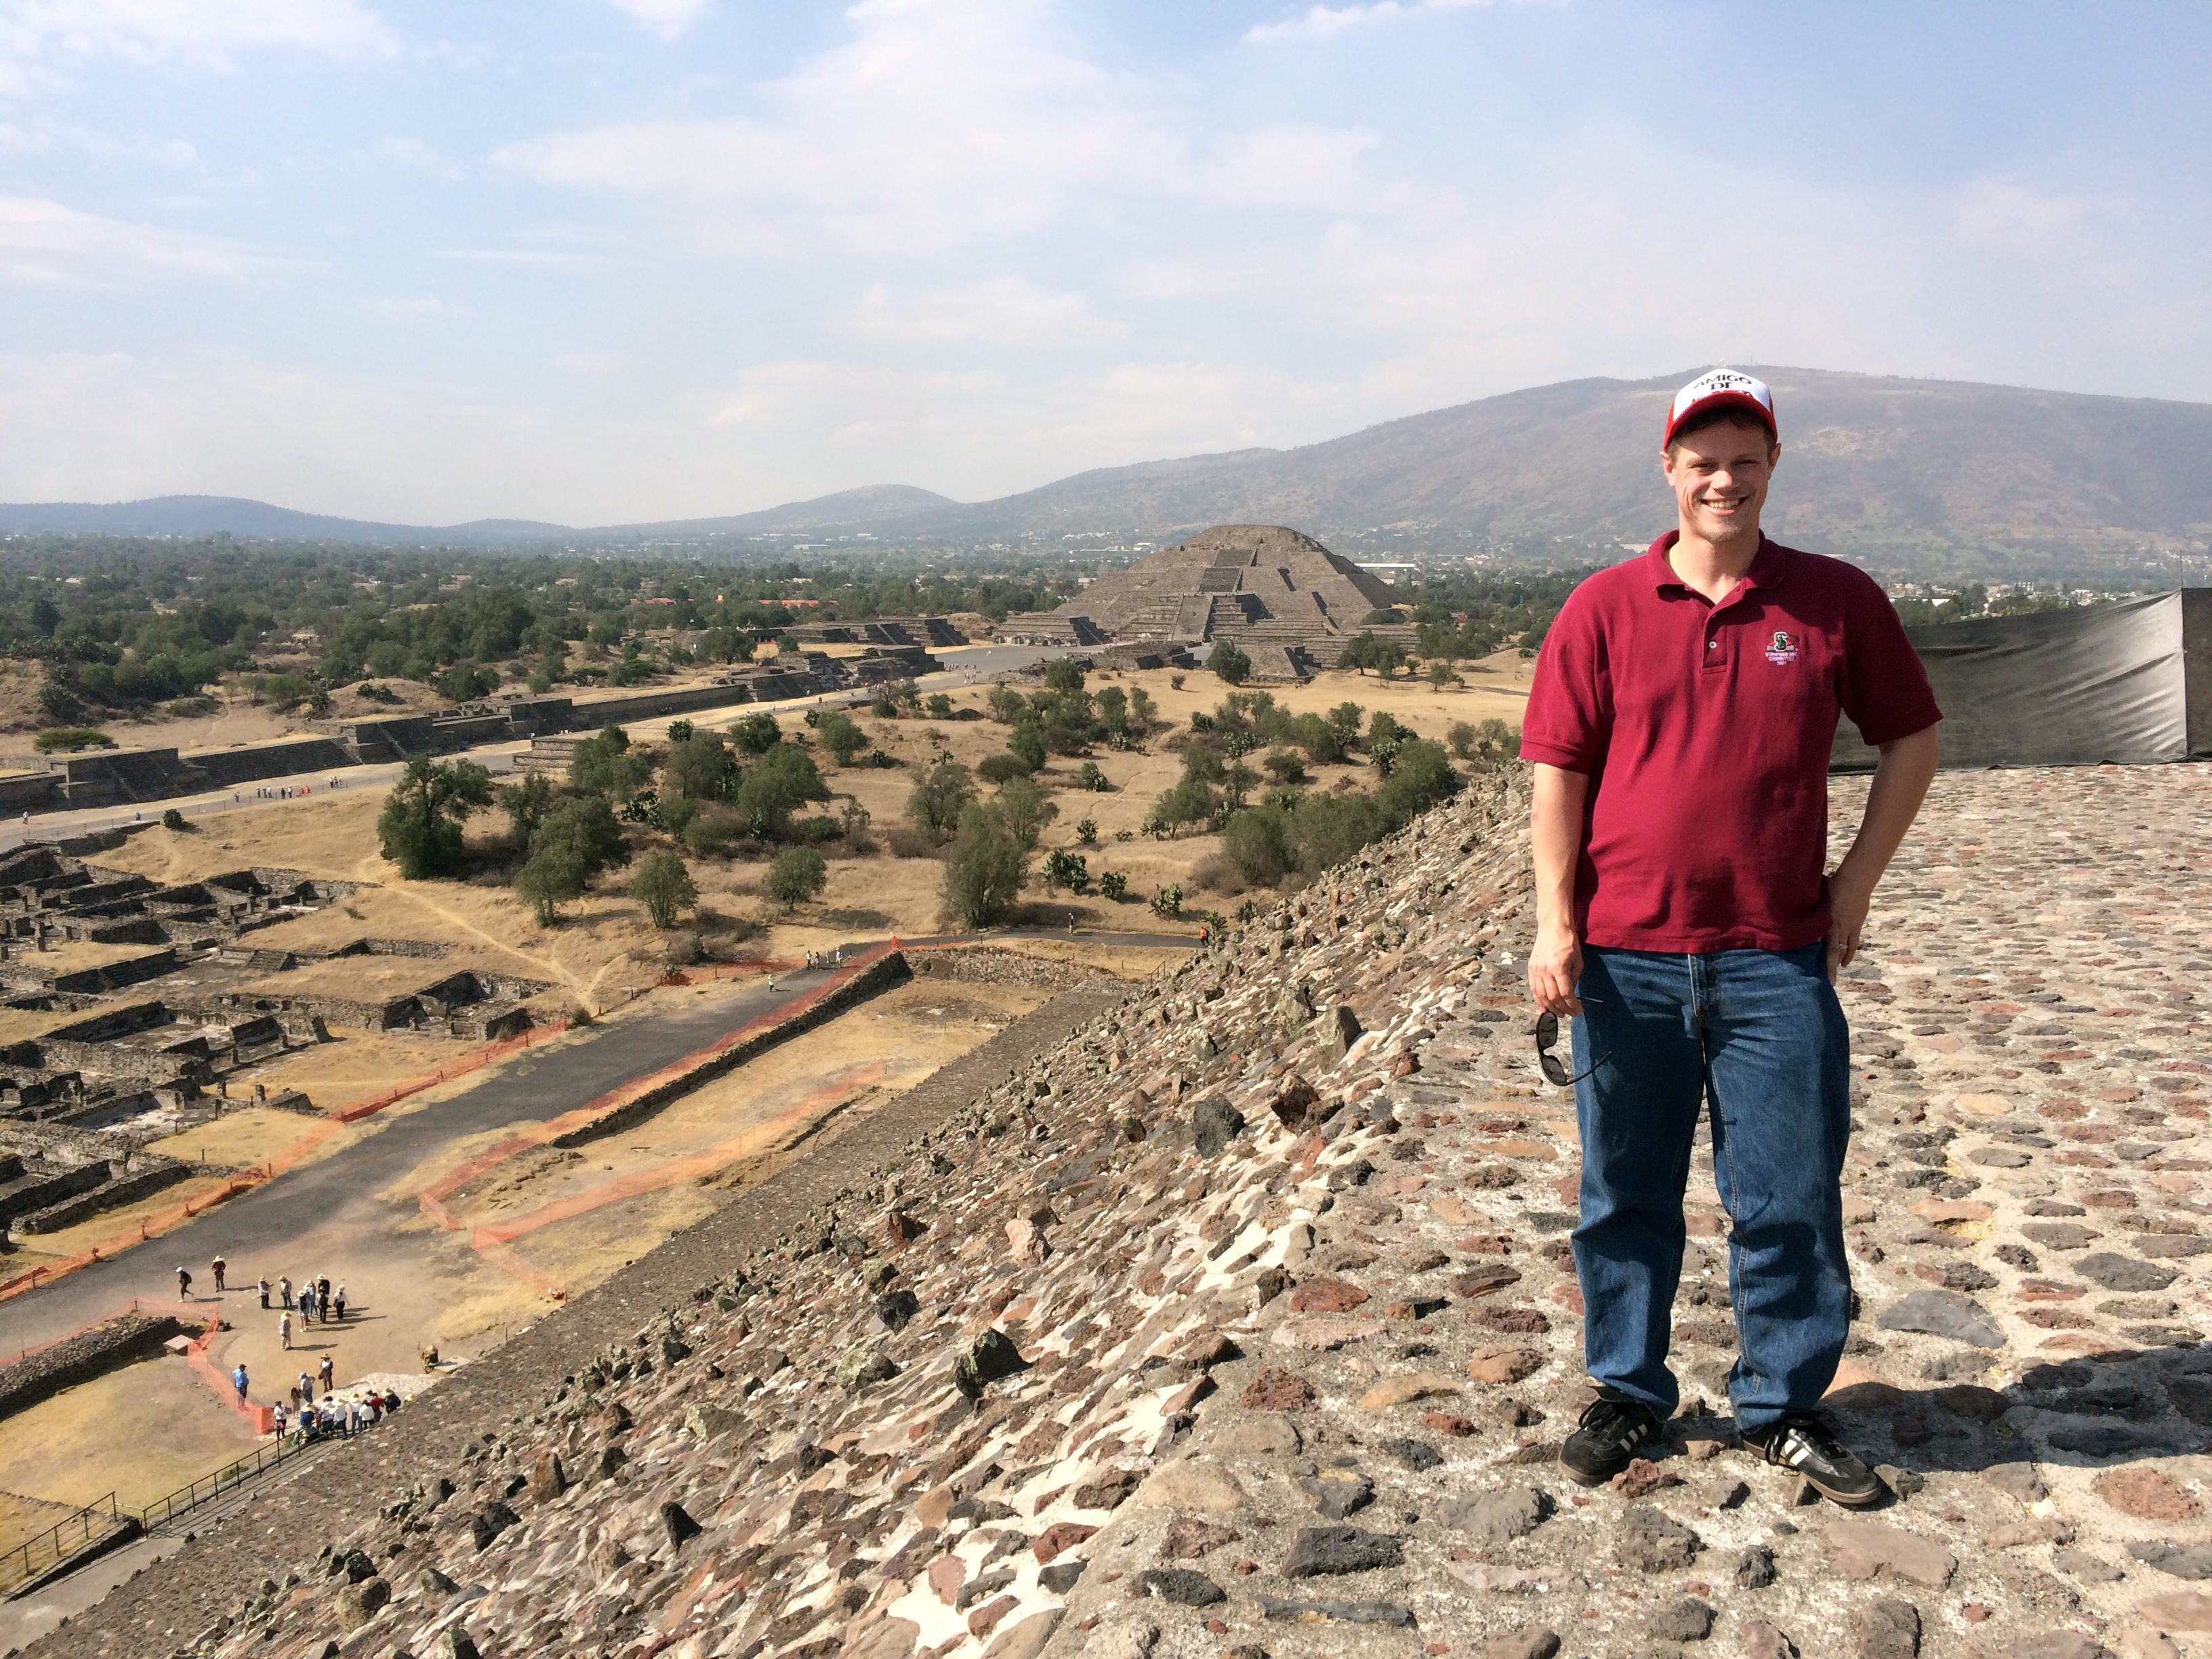 Hanging out in Teotihuacan on the Pyramid of the Sun, with the Pyramid of the Moon in the background